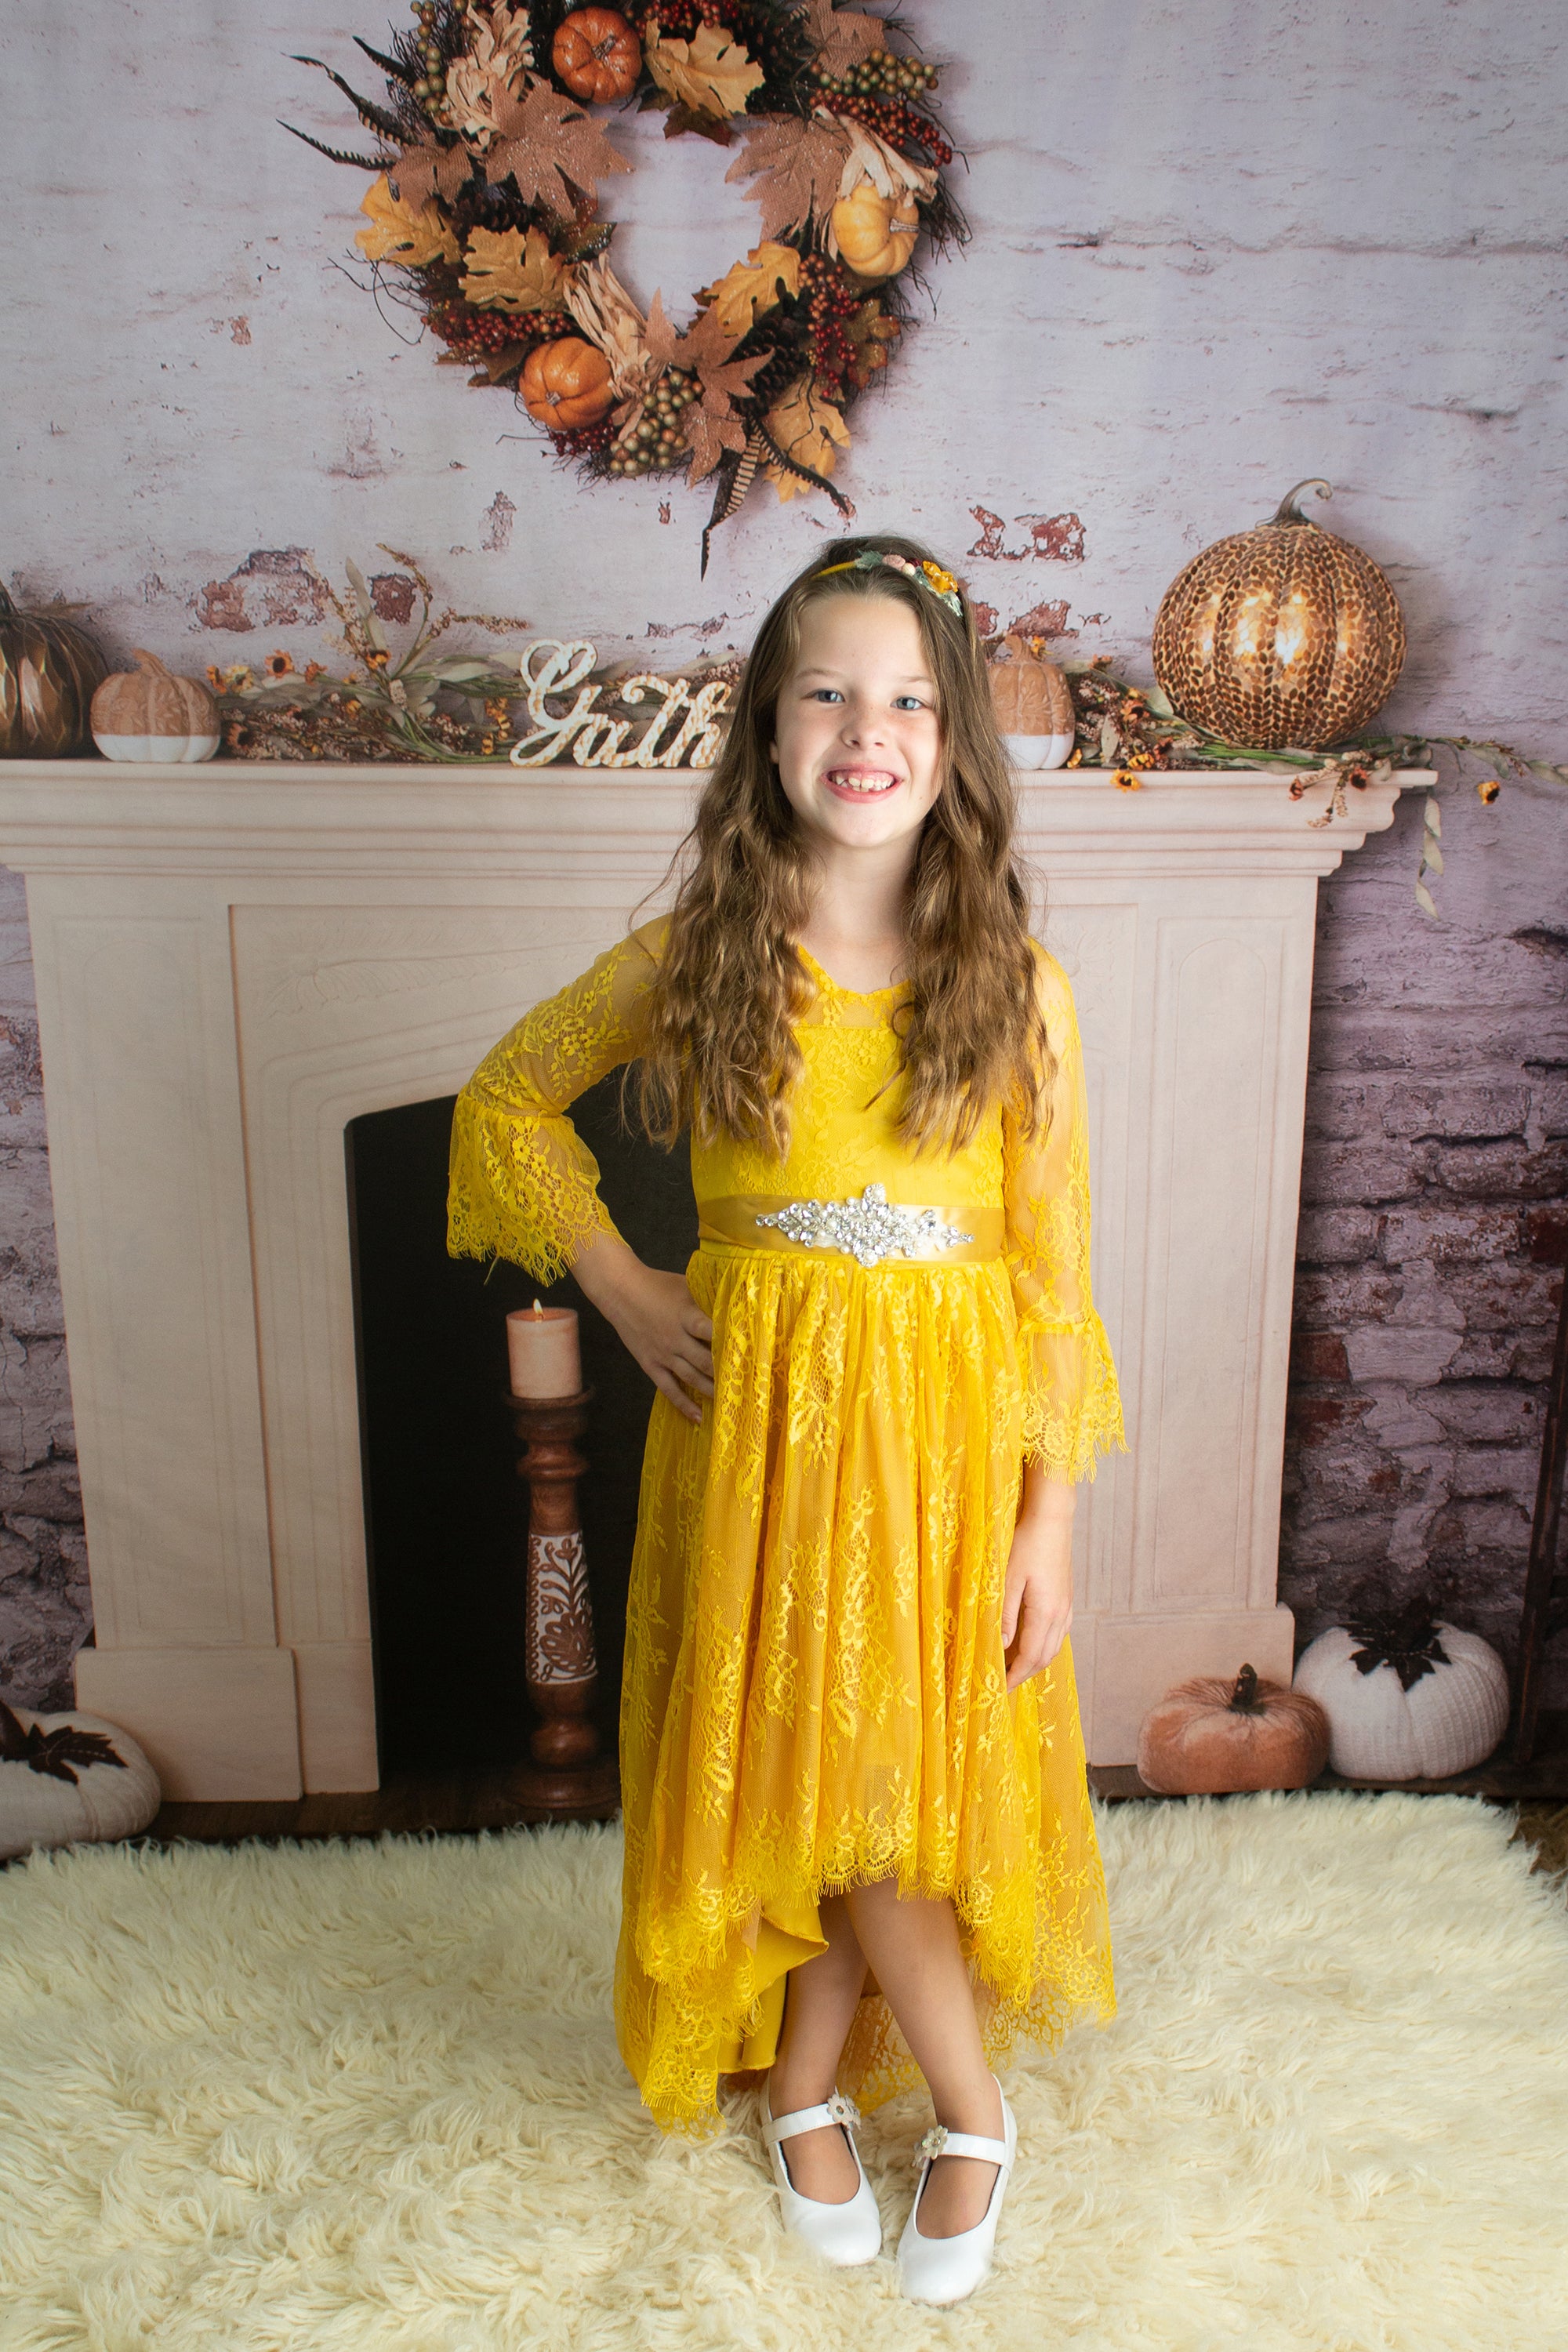 Kate Autumn Thanksgiving Pumpkins Decorations Room Backdrop Designed By Pine Park Collection